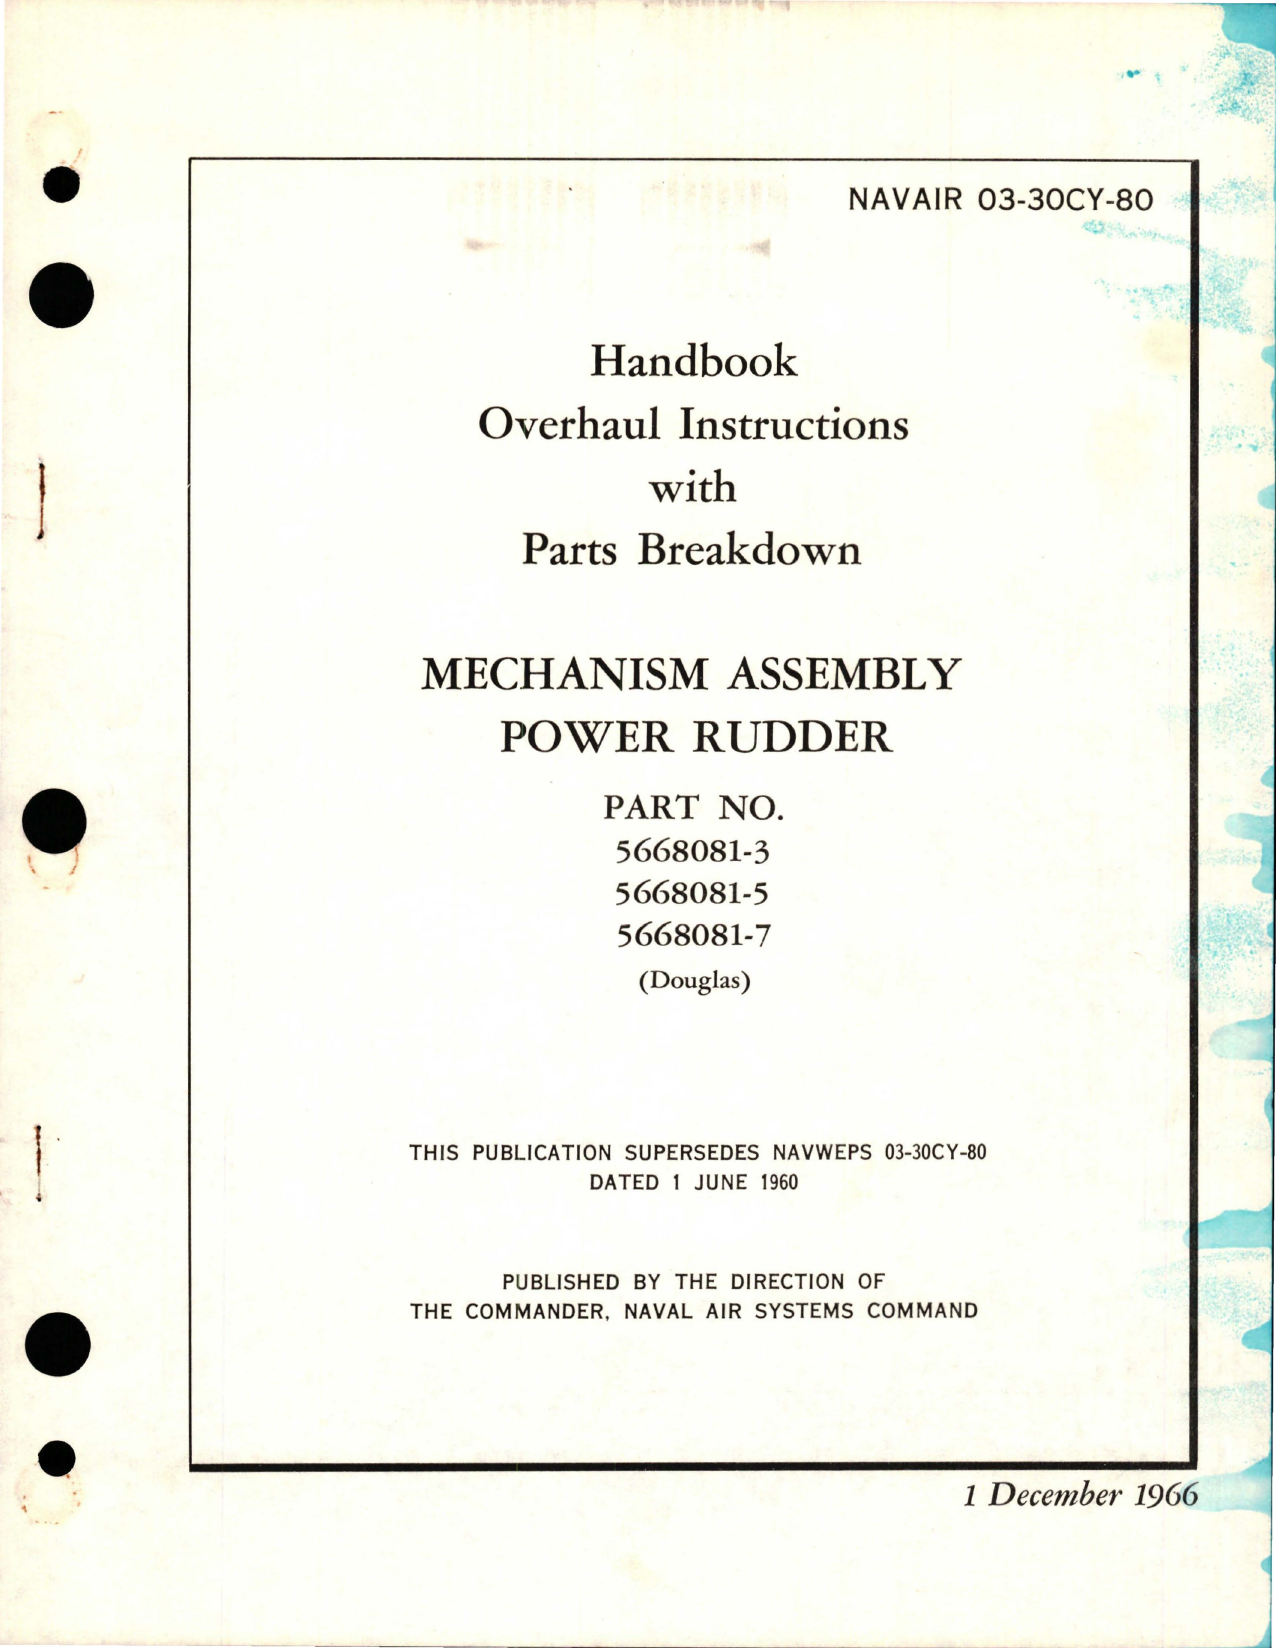 Sample page 1 from AirCorps Library document: Overhaul Instructions with Parts for Mechanism Assembly Power Rudder - Parts 5668081-3, 5668081-5, and 5668081-7